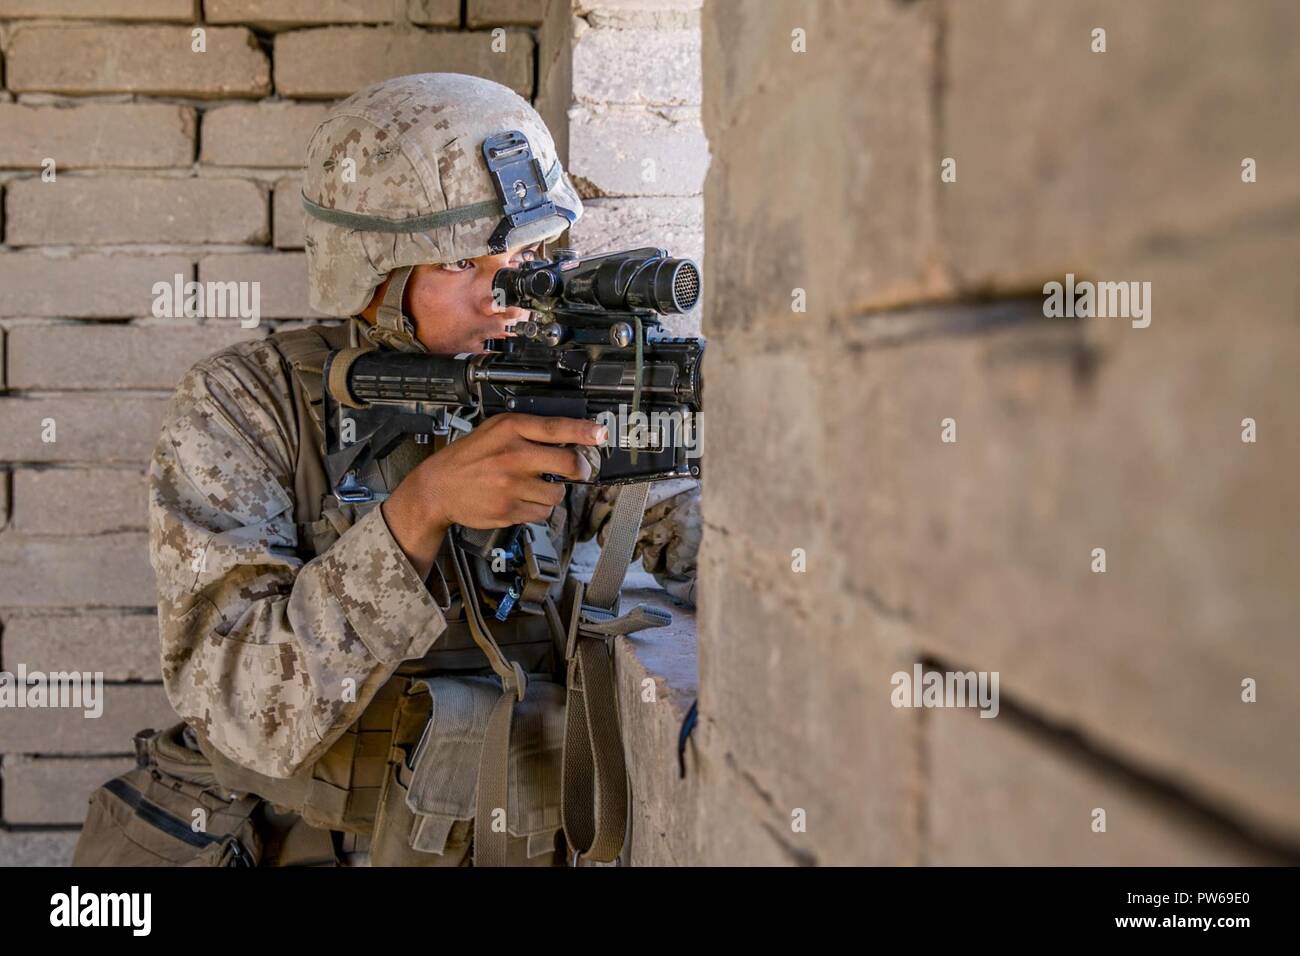 U.S. Marine Corps Lance Cpl. Brian Sanchezangel, an infantry Marine with Kilo Company, 3rd Battalion, 1st Marines, holds security for a rehearsal raid during Weapons and Tactics Instructors Course (WTI) 1-18 at Yuma, Ariz., on Sept. 27, 2017. WTI is a seven week training event hosted by Marine Aviation and Weapons Tactics Squadron One (MAWTS-1) cadre which emphasizes operational integration of the six functions of Marine Corps Aviation in support of a Marine Air Ground Task Force. MAWTS-1 provides standardized advanced tactical training and certification of unit instructor qualifications to su Stock Photo